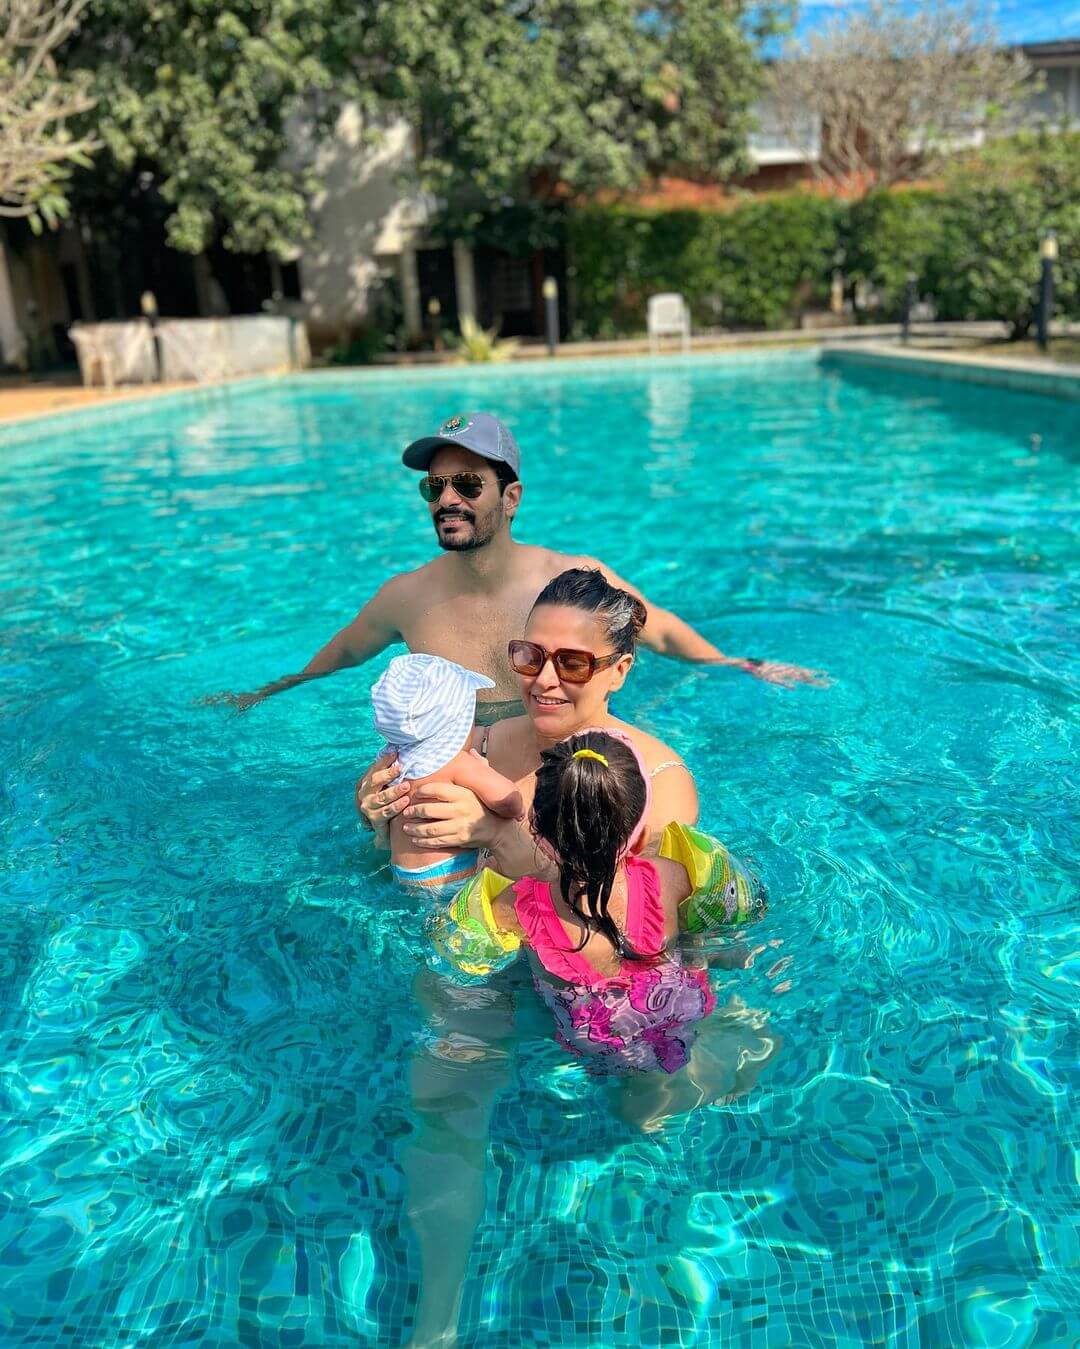 Neha Dhupia And Angad Bedi Enjoying In The Pool With Their Kids In Swimming Costumes